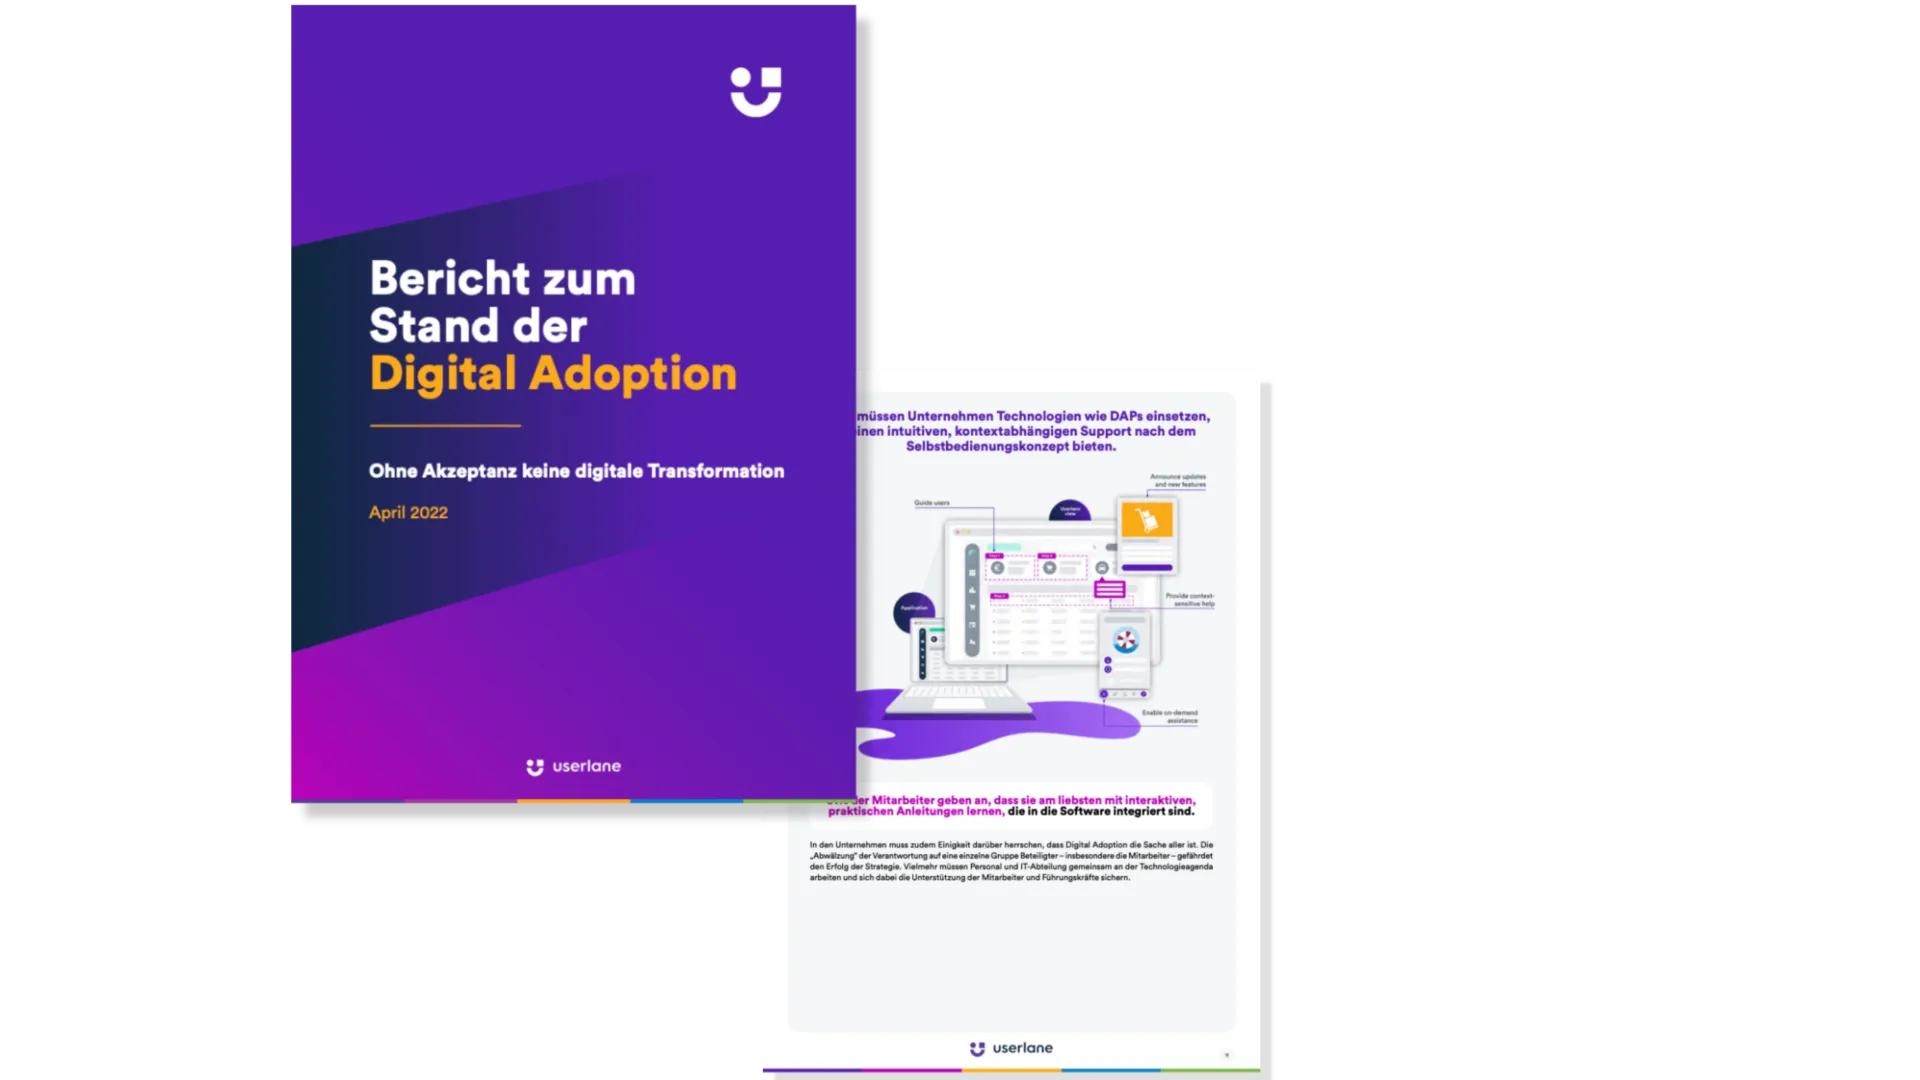 Report on the state of digital adoption